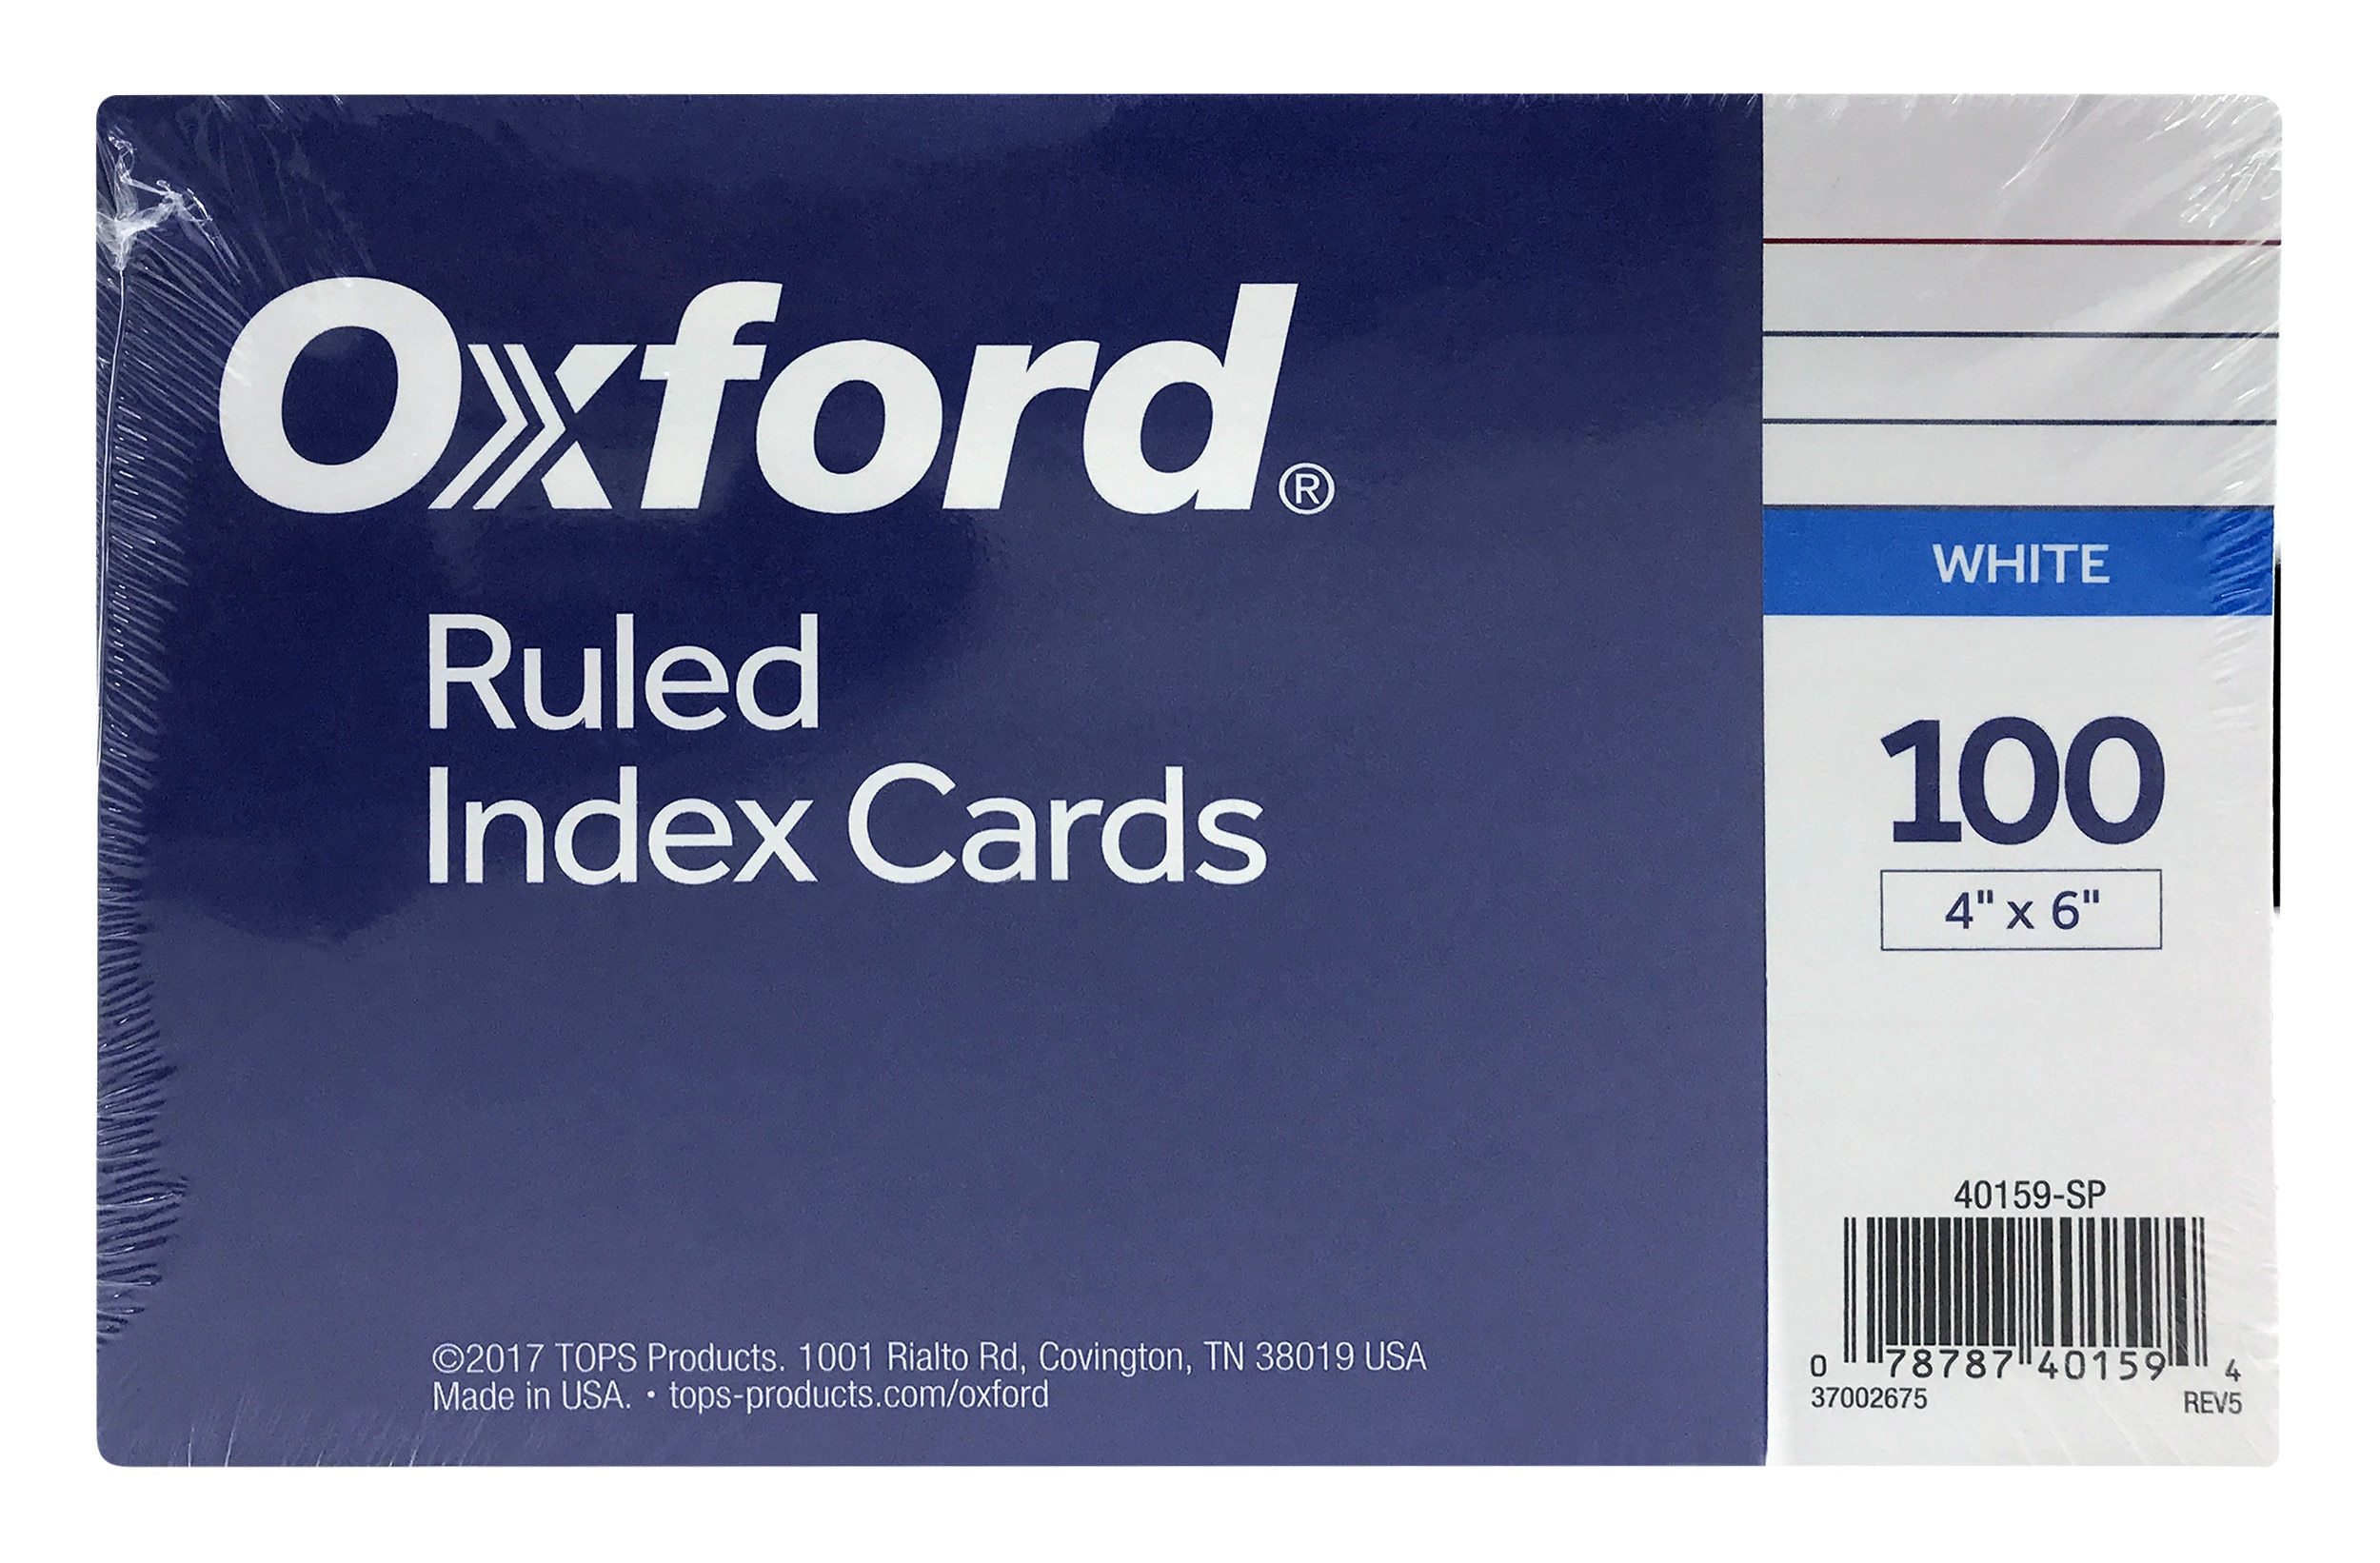 4 X 6 RULED INDEX CARDS